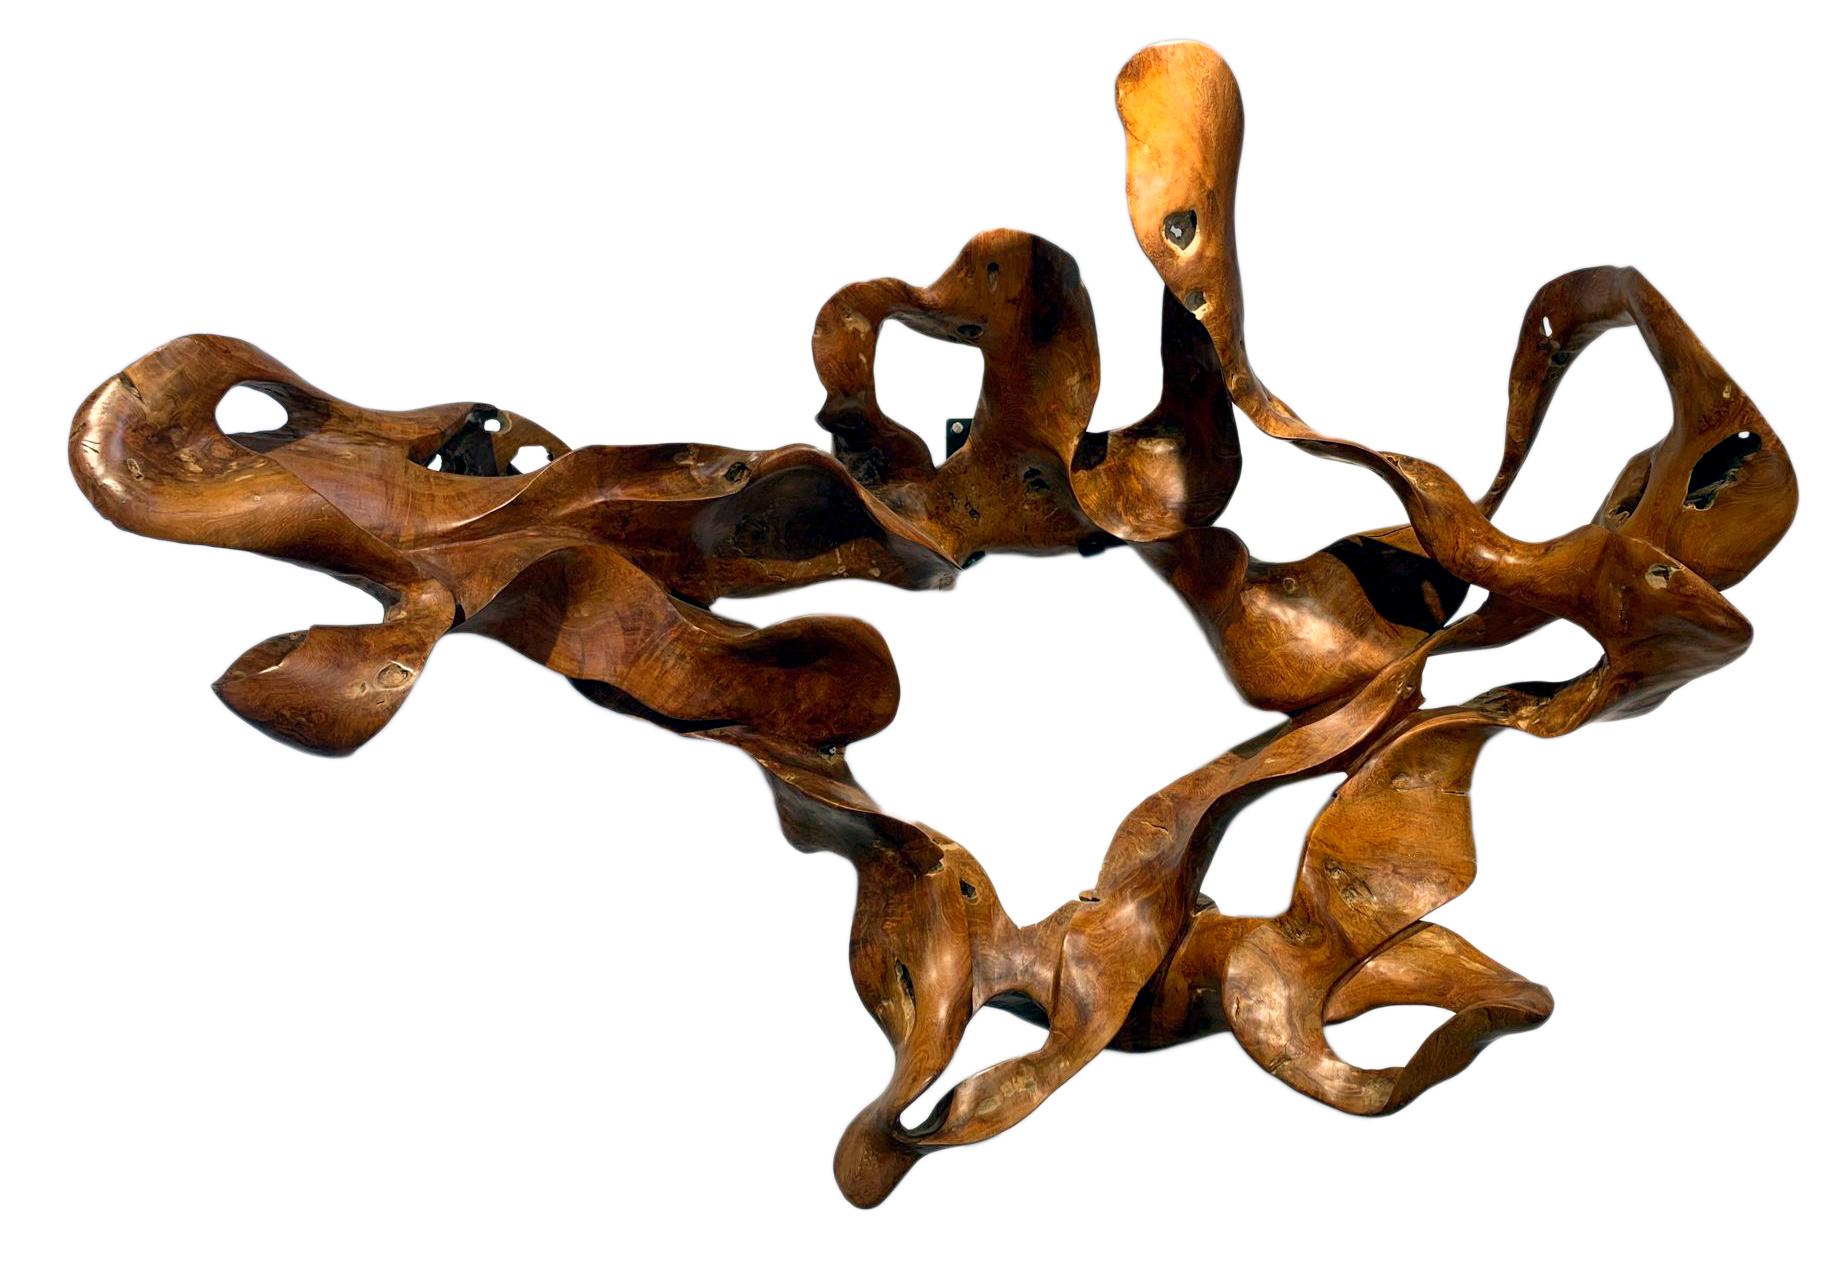 Mahogany root

The Ingravidesa Sculpture Alliance is formed by an international group of sculptors and designers who collaborate to create abstract sculpture inspired by nature. They often work together for months on monumental projects. The pieces